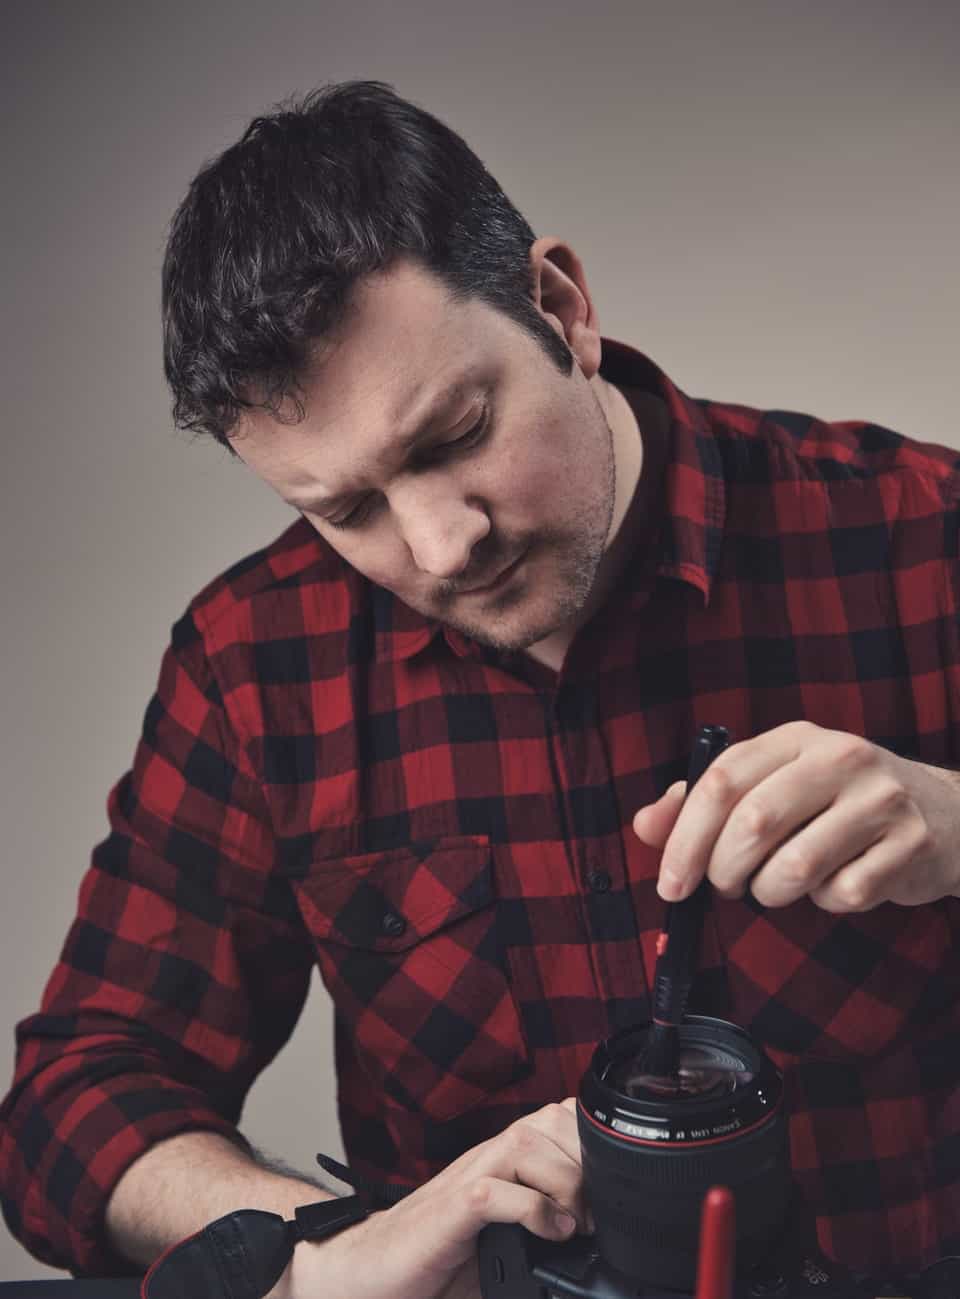 man in plaid shirt cleaning camera lens